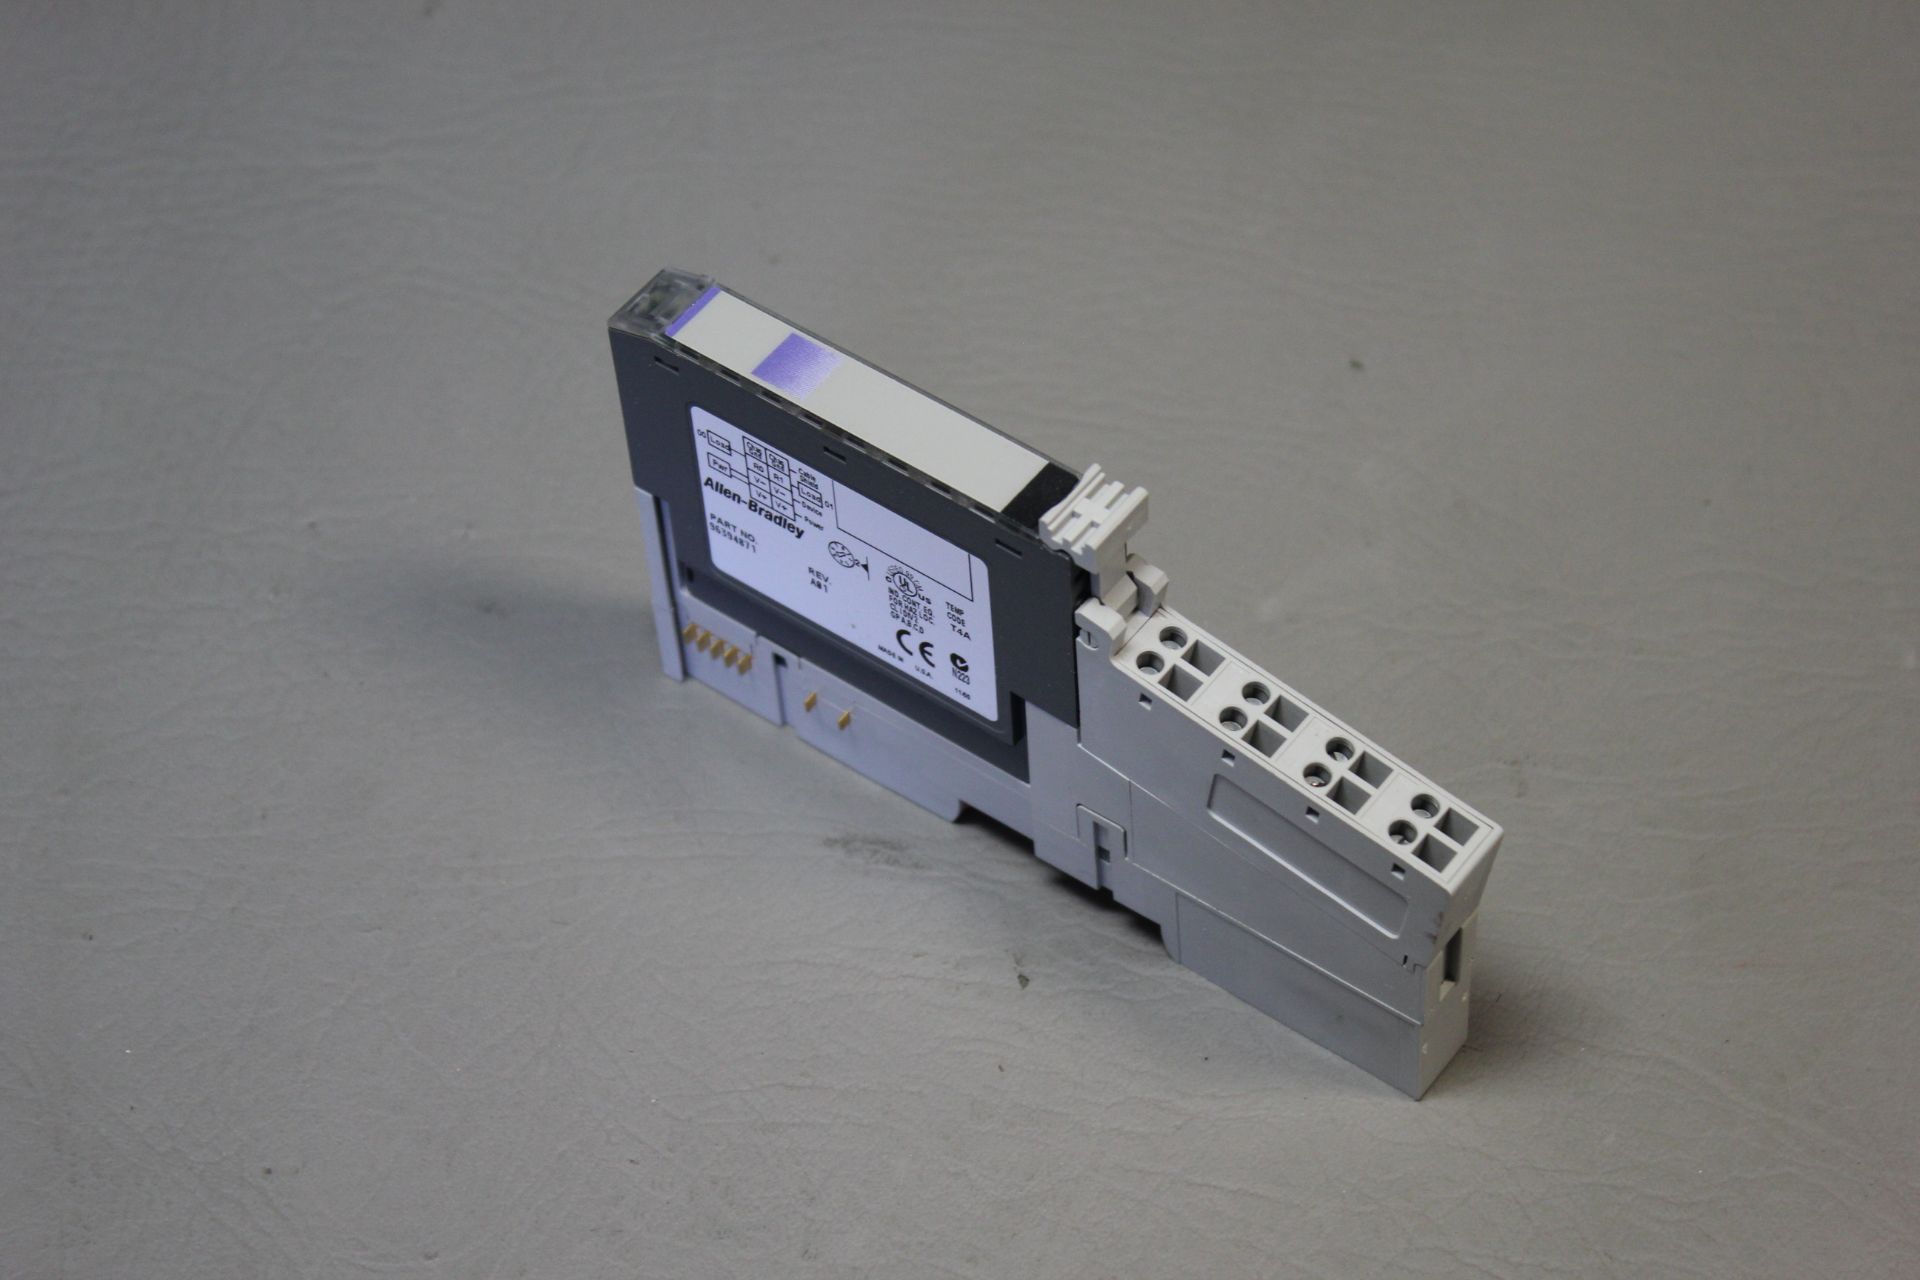 ALLEN BRADLEY VERY HIGH SPEED COUNTER MODULE SET WITH BASES - Image 3 of 8